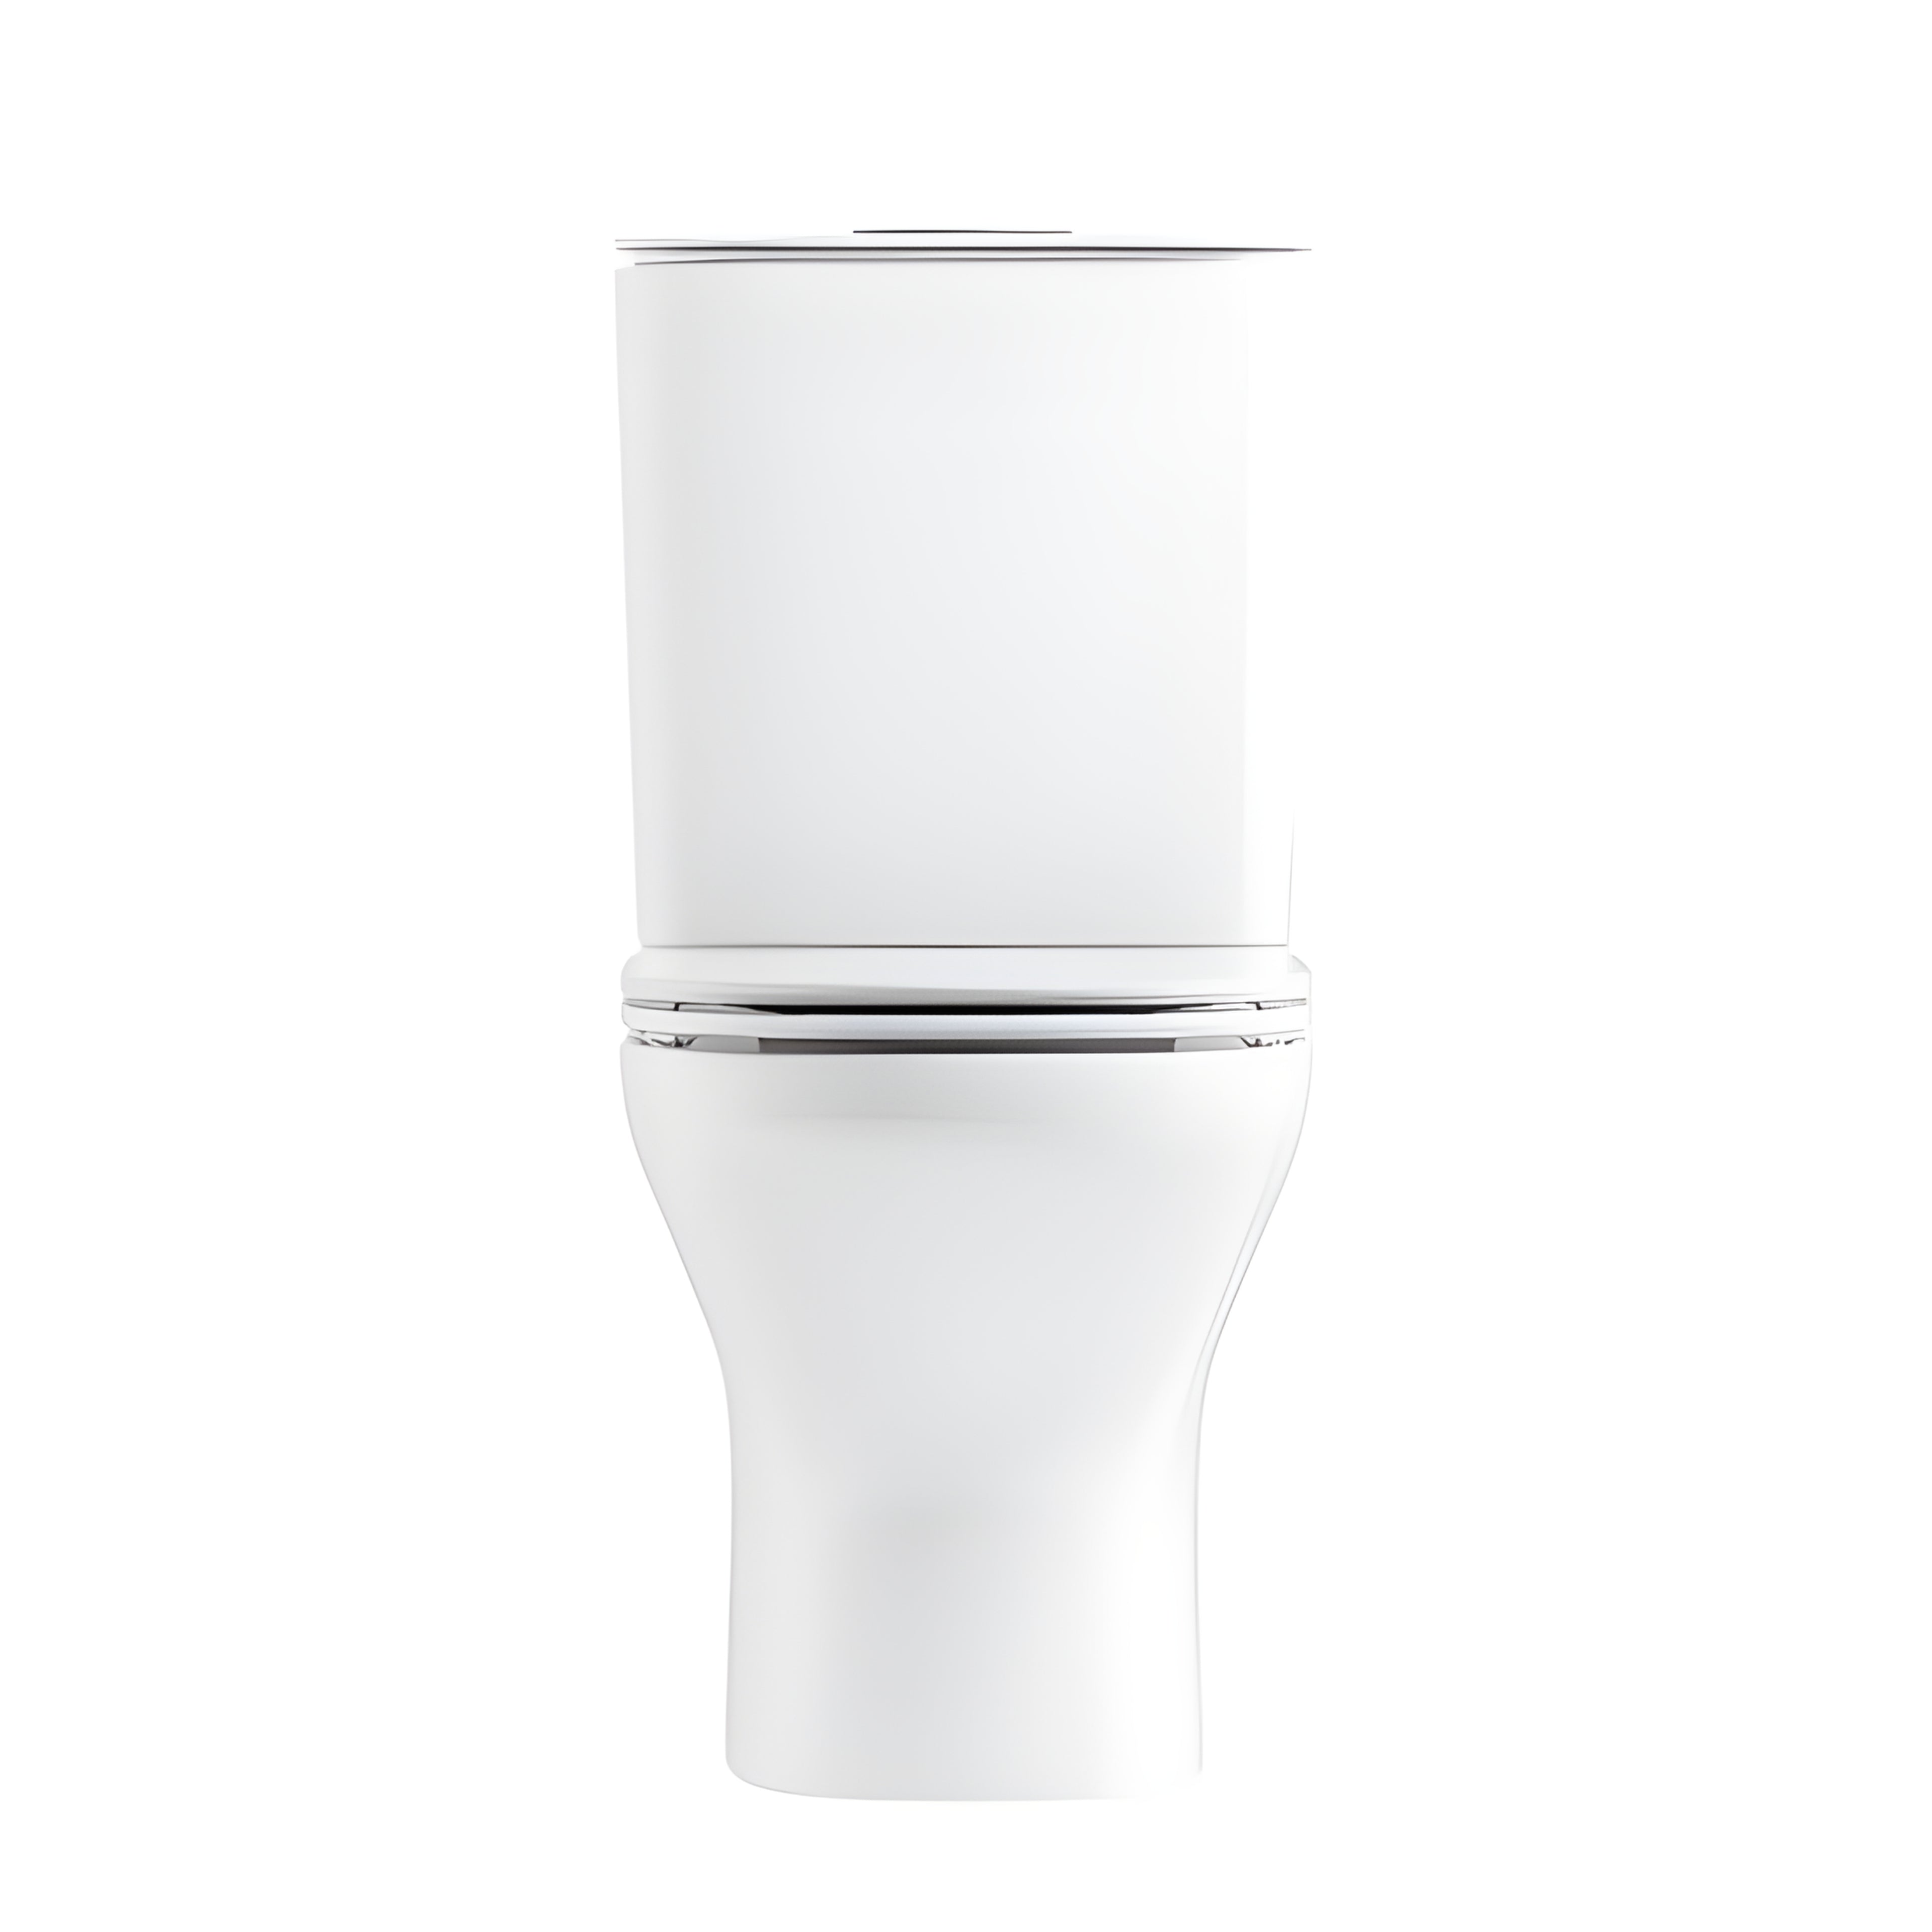 KOHLER MODERNLIFE BACK TO WALL TOILET SUITE WITH ELITE SEAT GLOSS WHITE